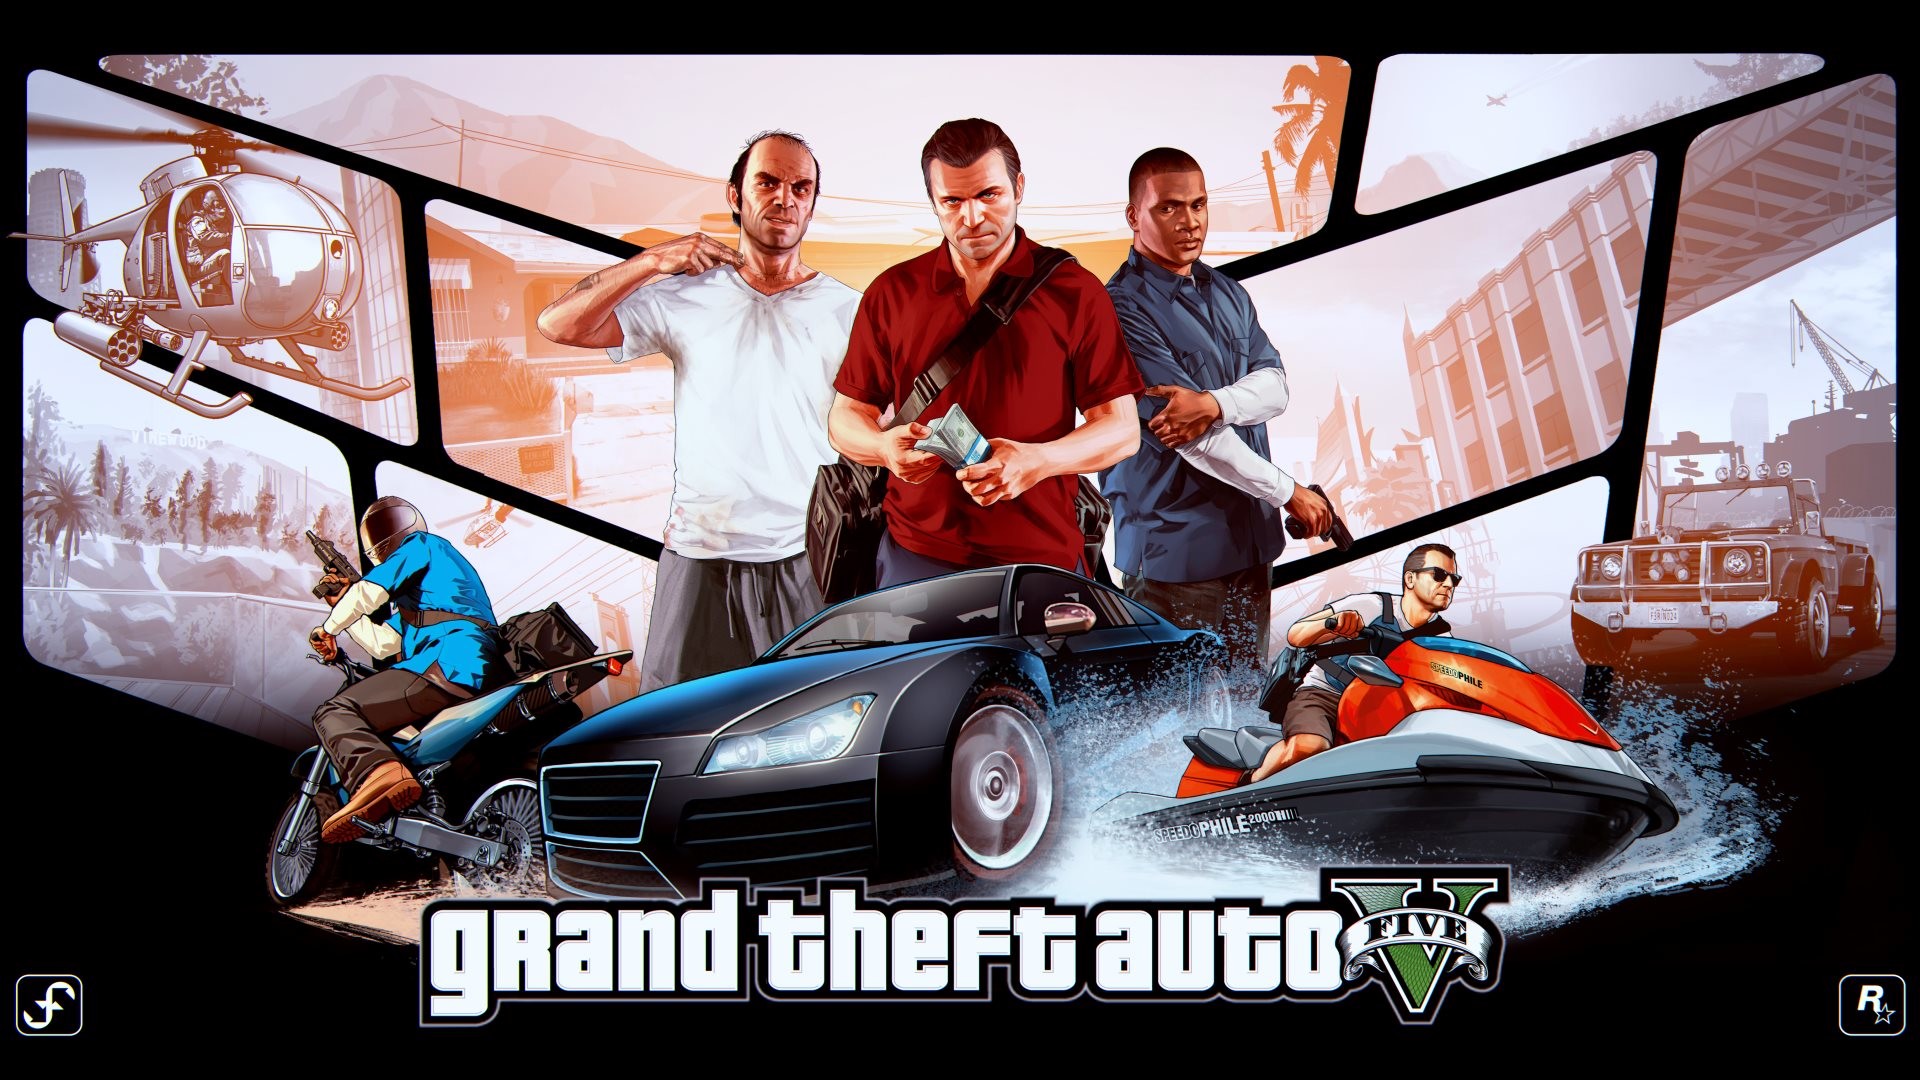 1920x1080 The Grand Theft Auto V Poster customized in 4K, HD and wide sizes to be  compatible as wallpaper in any modern desktop screen